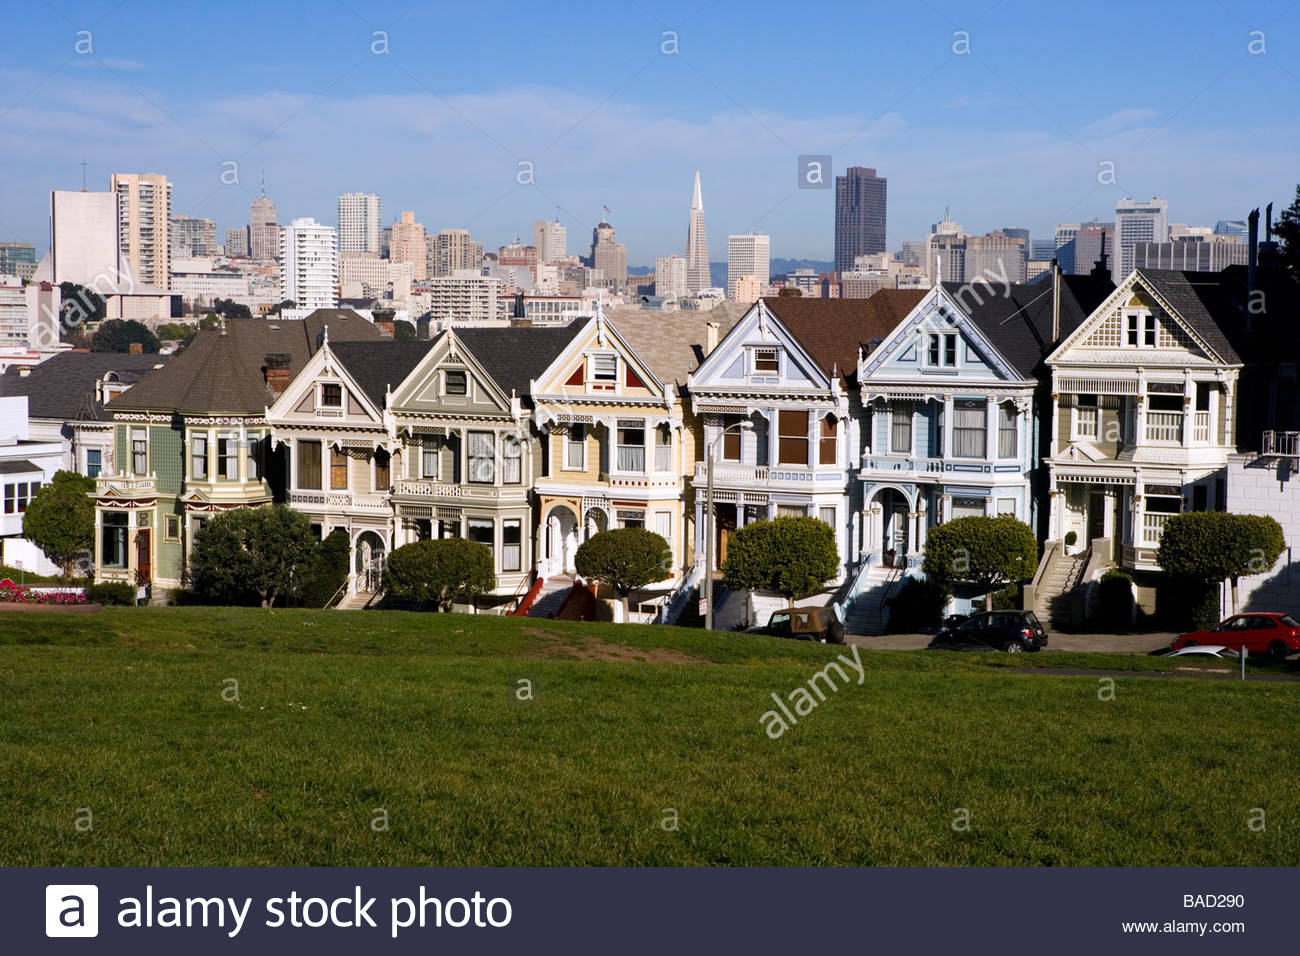 Victorian Houses On Alamo Square With City Skyline In Background